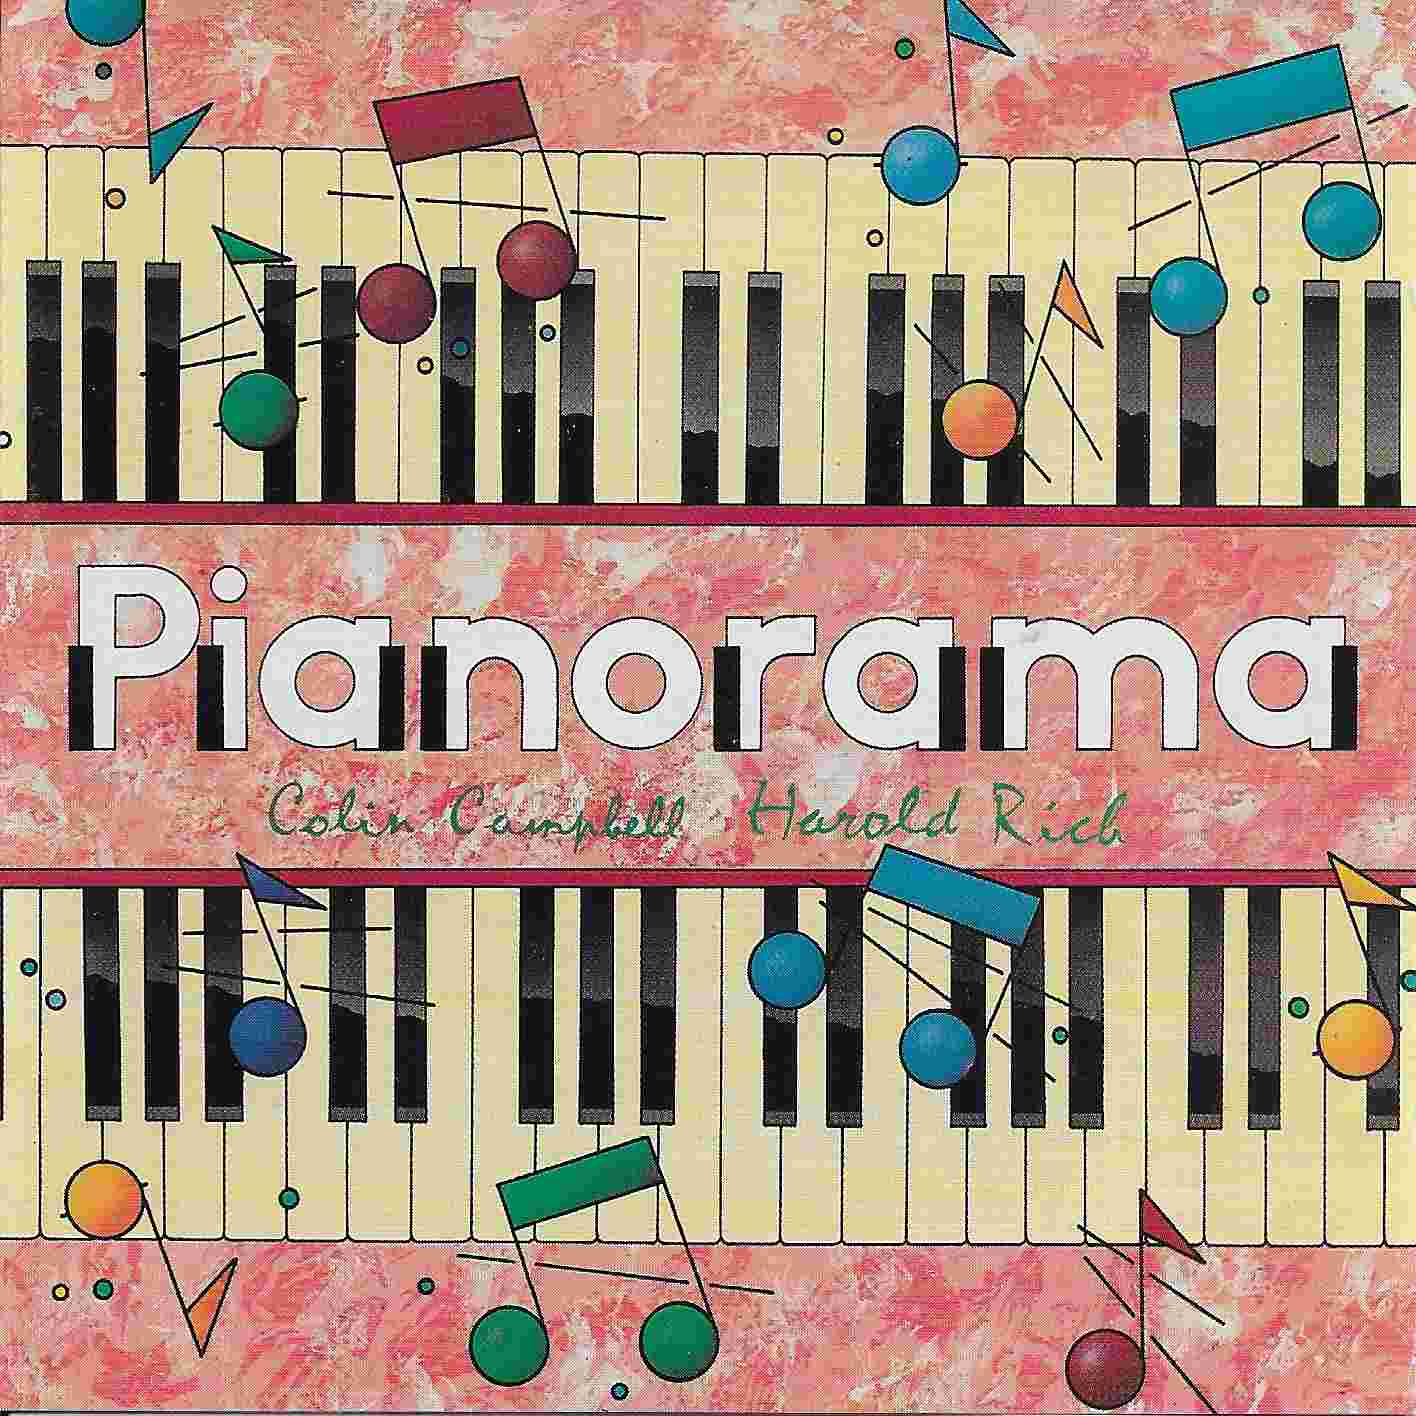 Picture of BBCCD674 Pianorama - Harold Rich / Colin Campbell by artist Harold Rich / Colin Campbell from the BBC cds - Records and Tapes library